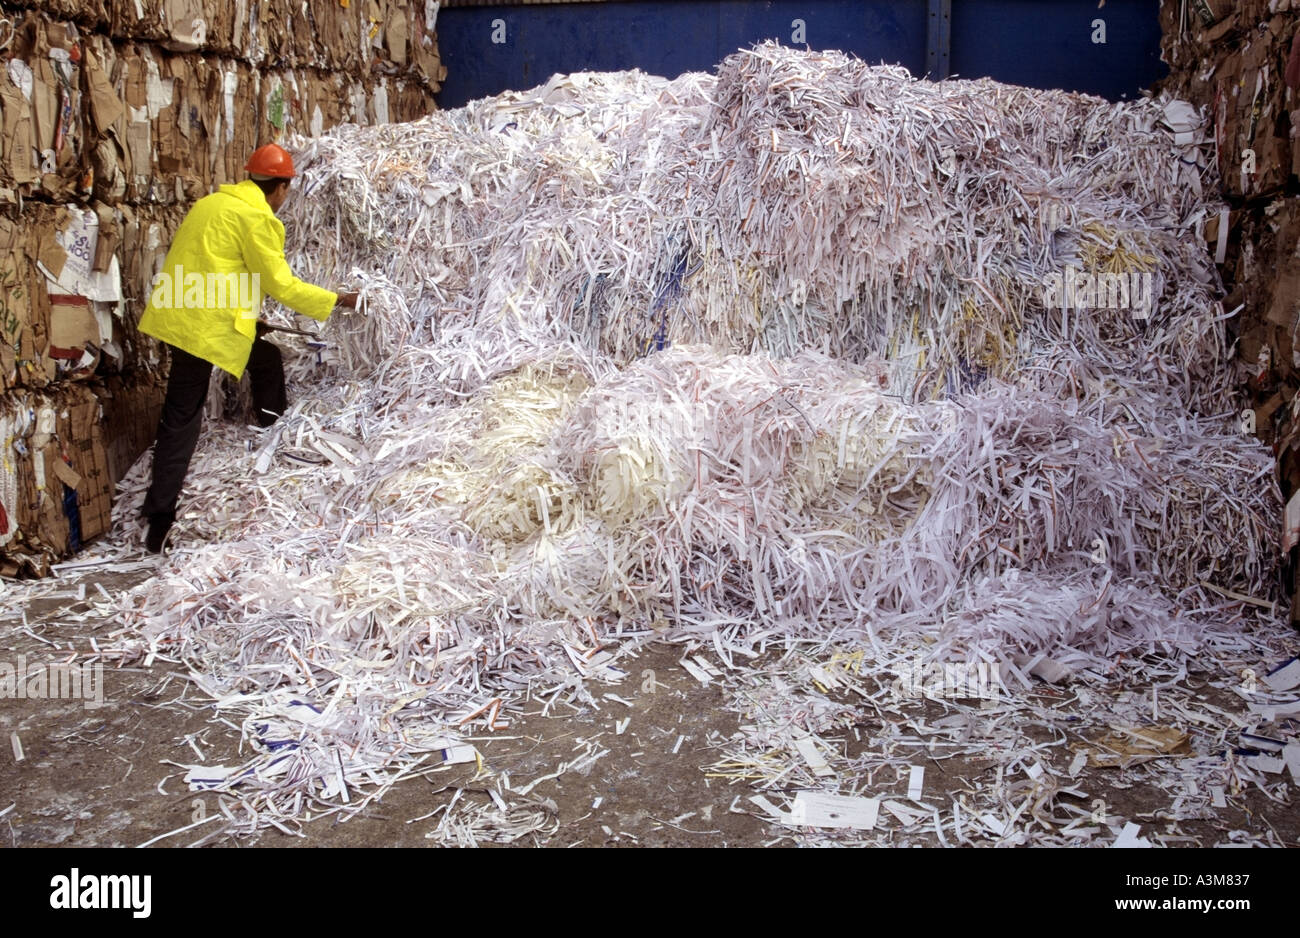 Man working in interior of large factory warehouse paper mill building processing industrial waste cardboard & paper for recycling Essex England UK Stock Photo